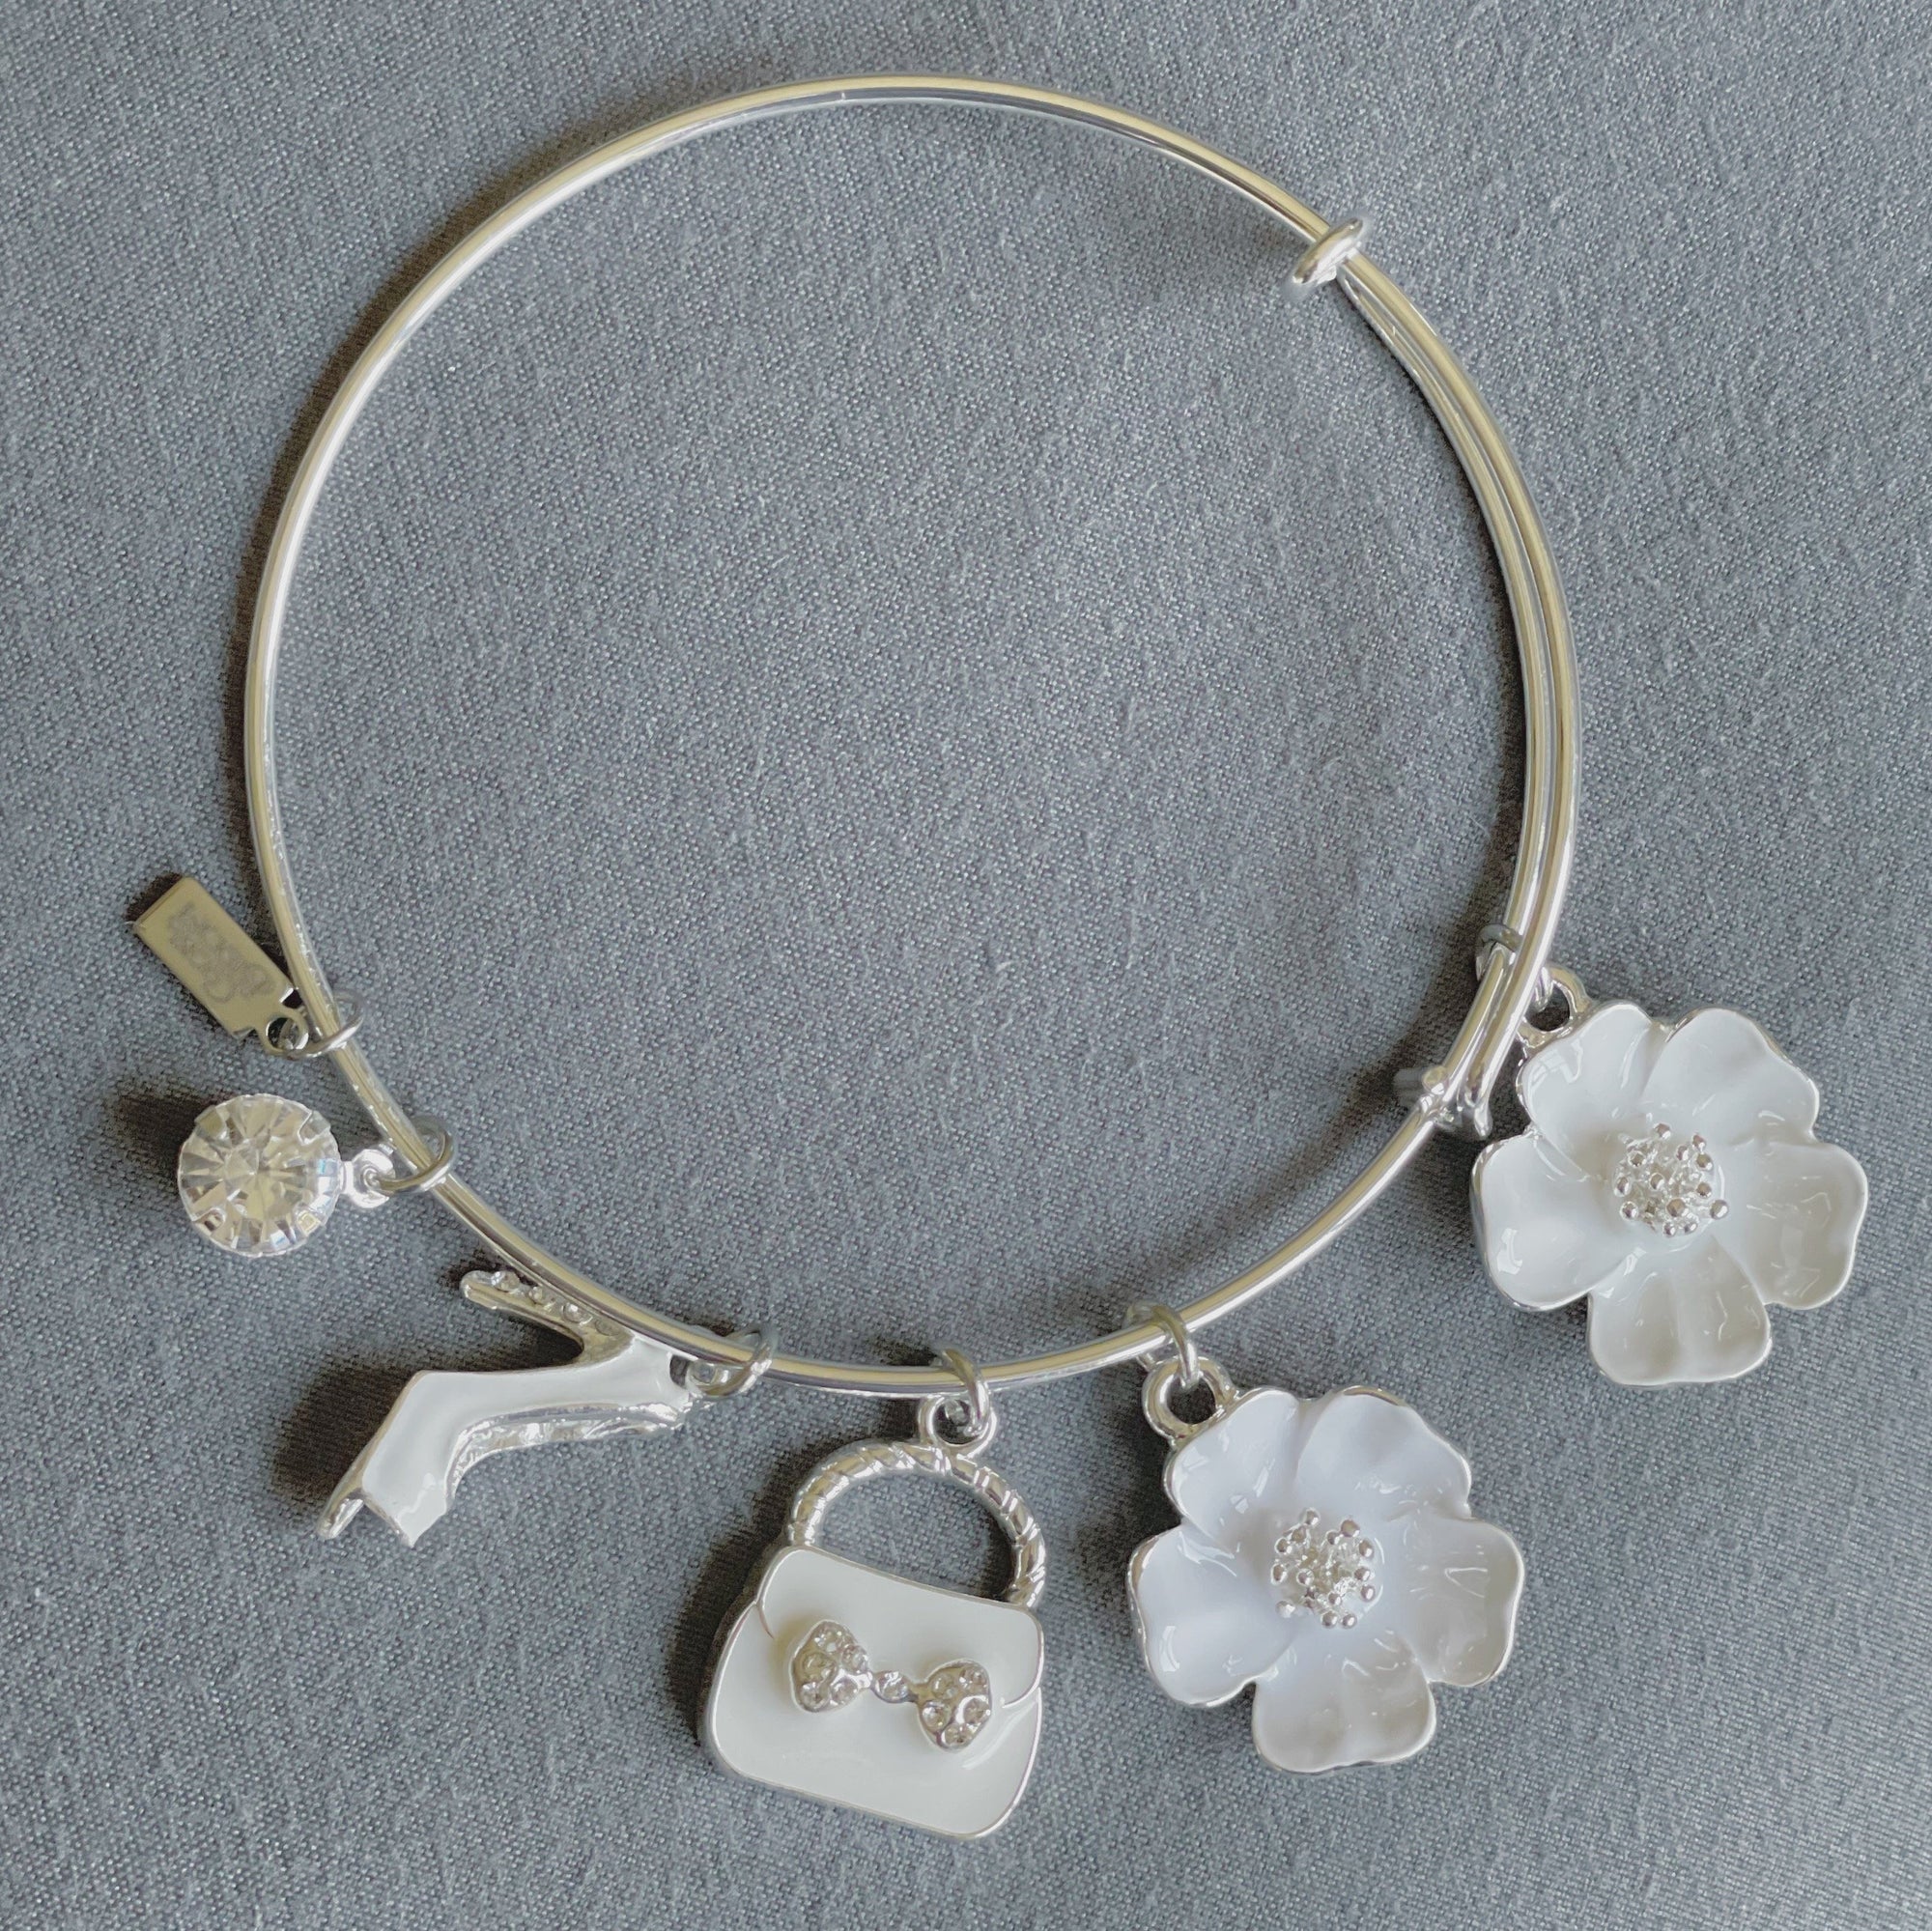 CookiBloom Jewelry Flowers White Blooming Charm Bracelet